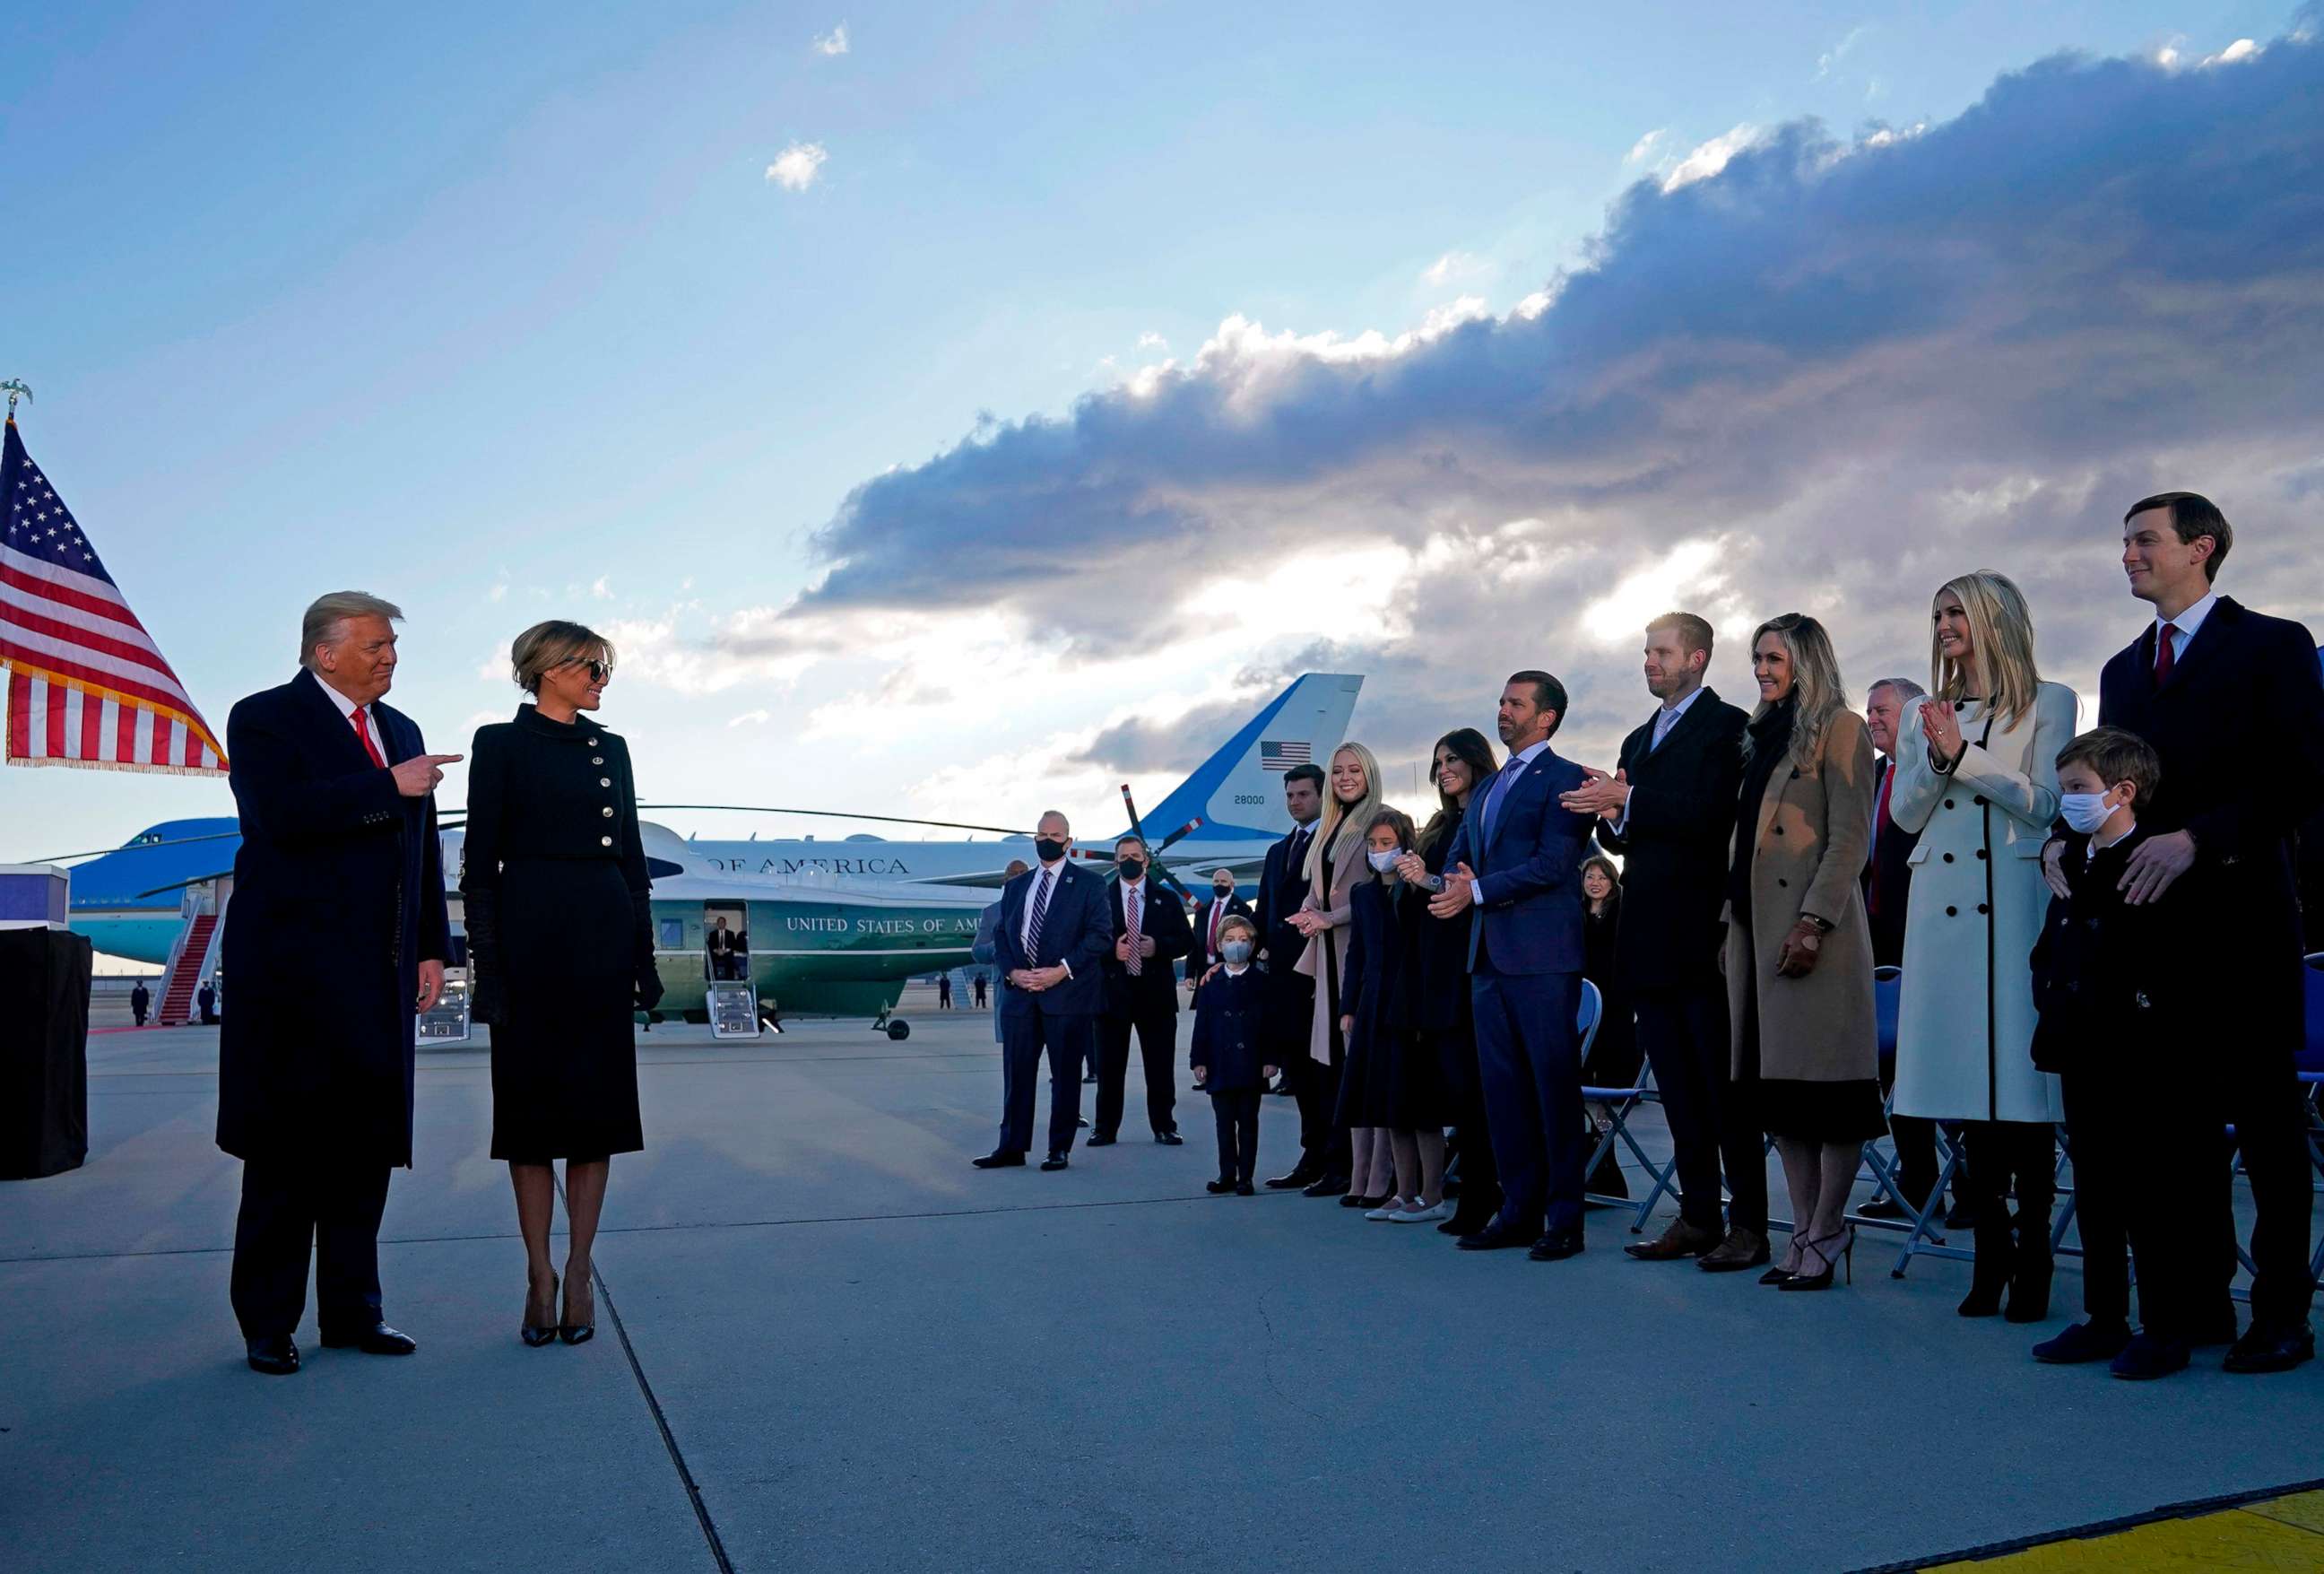 PHOTO: President Donald Trump and First Lady Melania are greeted by their family members on the tarmac at Joint Base Andrews in Maryland, Jan. 20, 2021, after departing the White House.